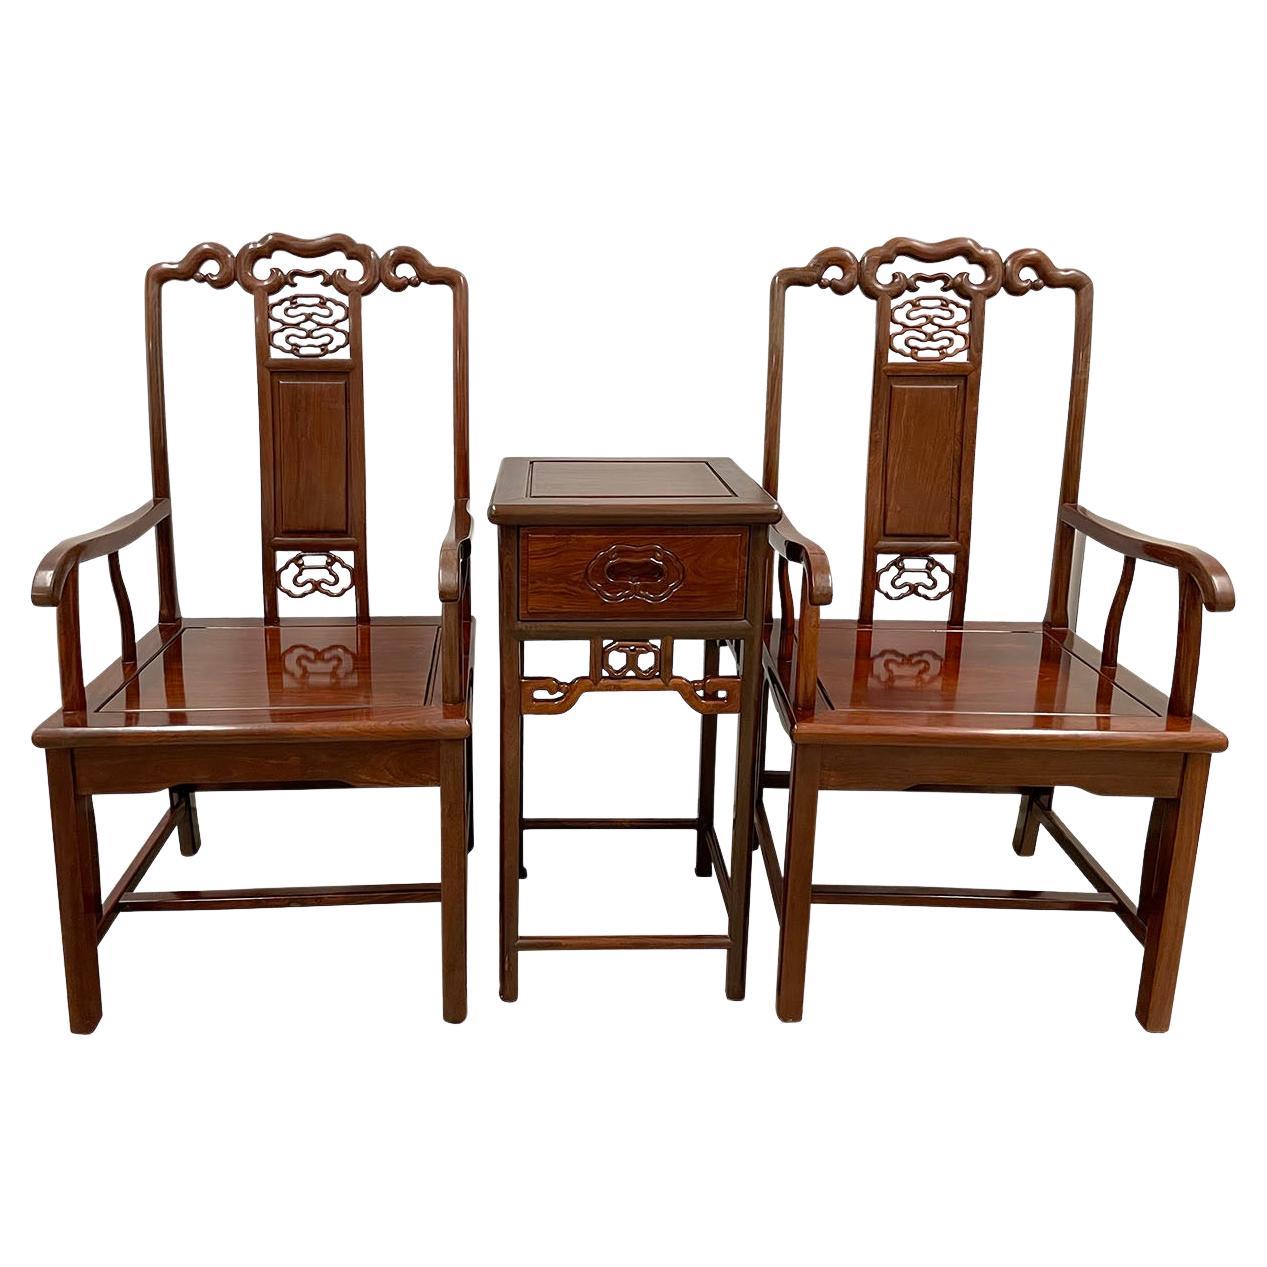 This gorgeous set of Vintage Chinese Horseshoe Back Armchairs with center tea table are made from solid rosewood. Very solid and sturdy. It features a beautiful carving works on the back and front. This chairs set include a tea table in between. It